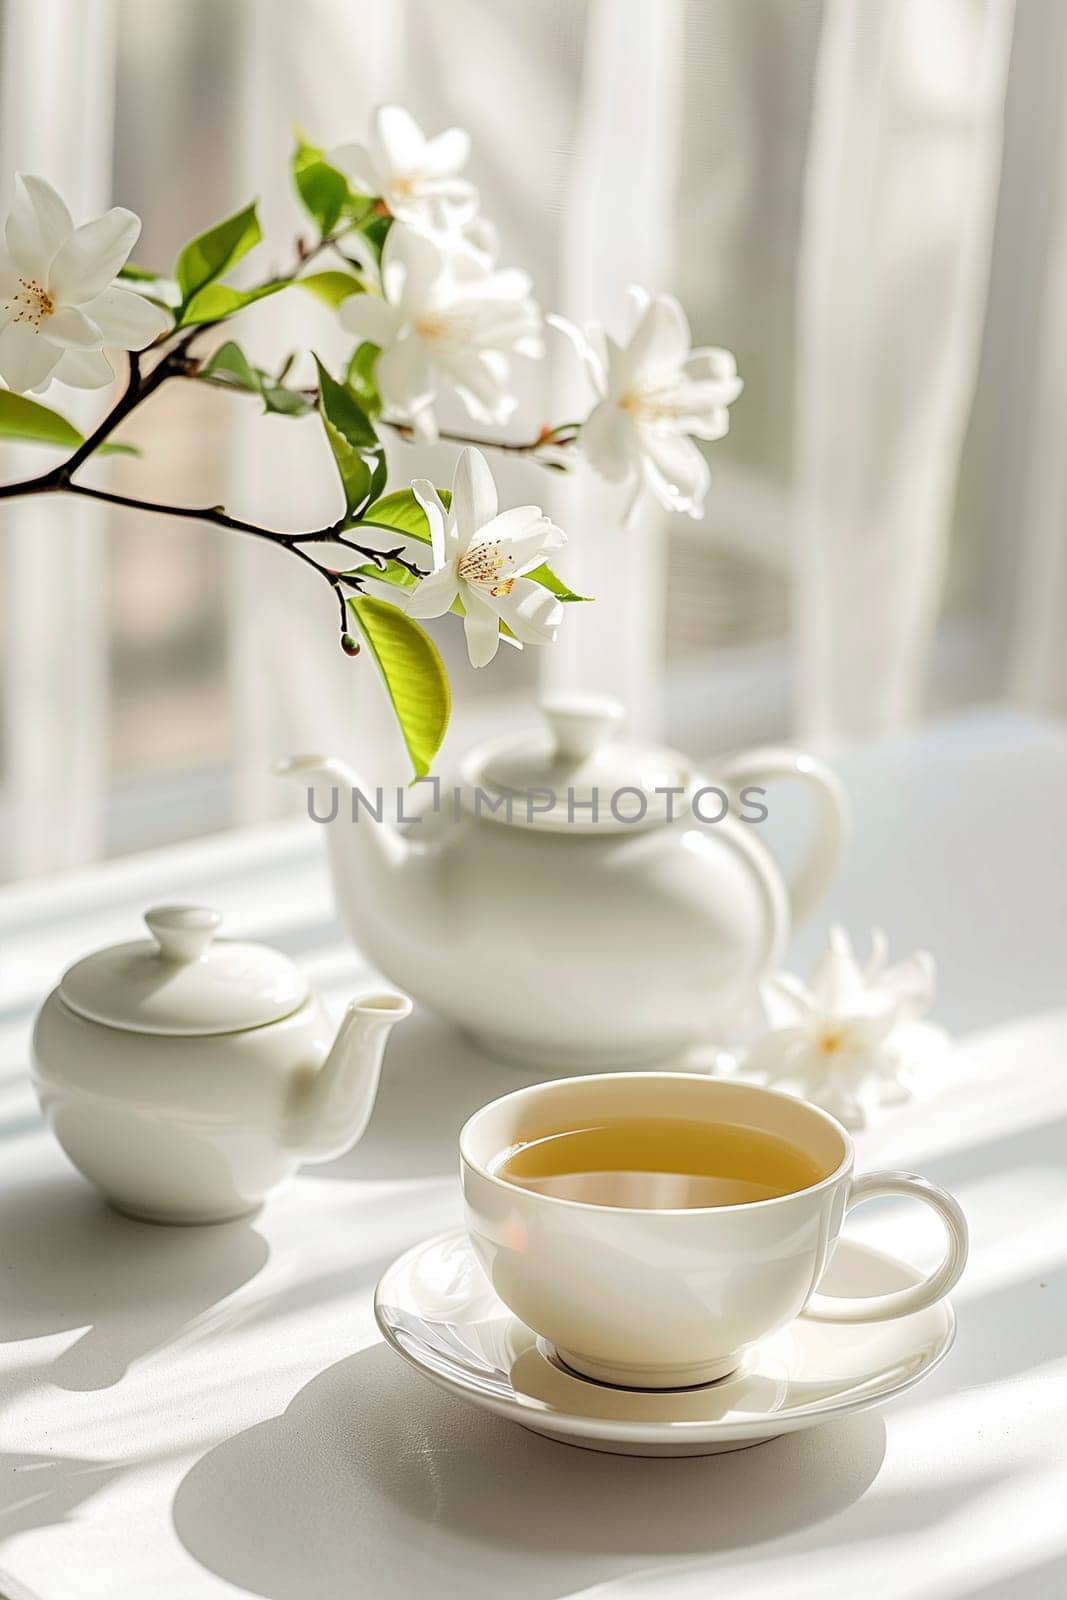 A cup of tea sitting next to a teapot on a table with a vibrant flower in the background.